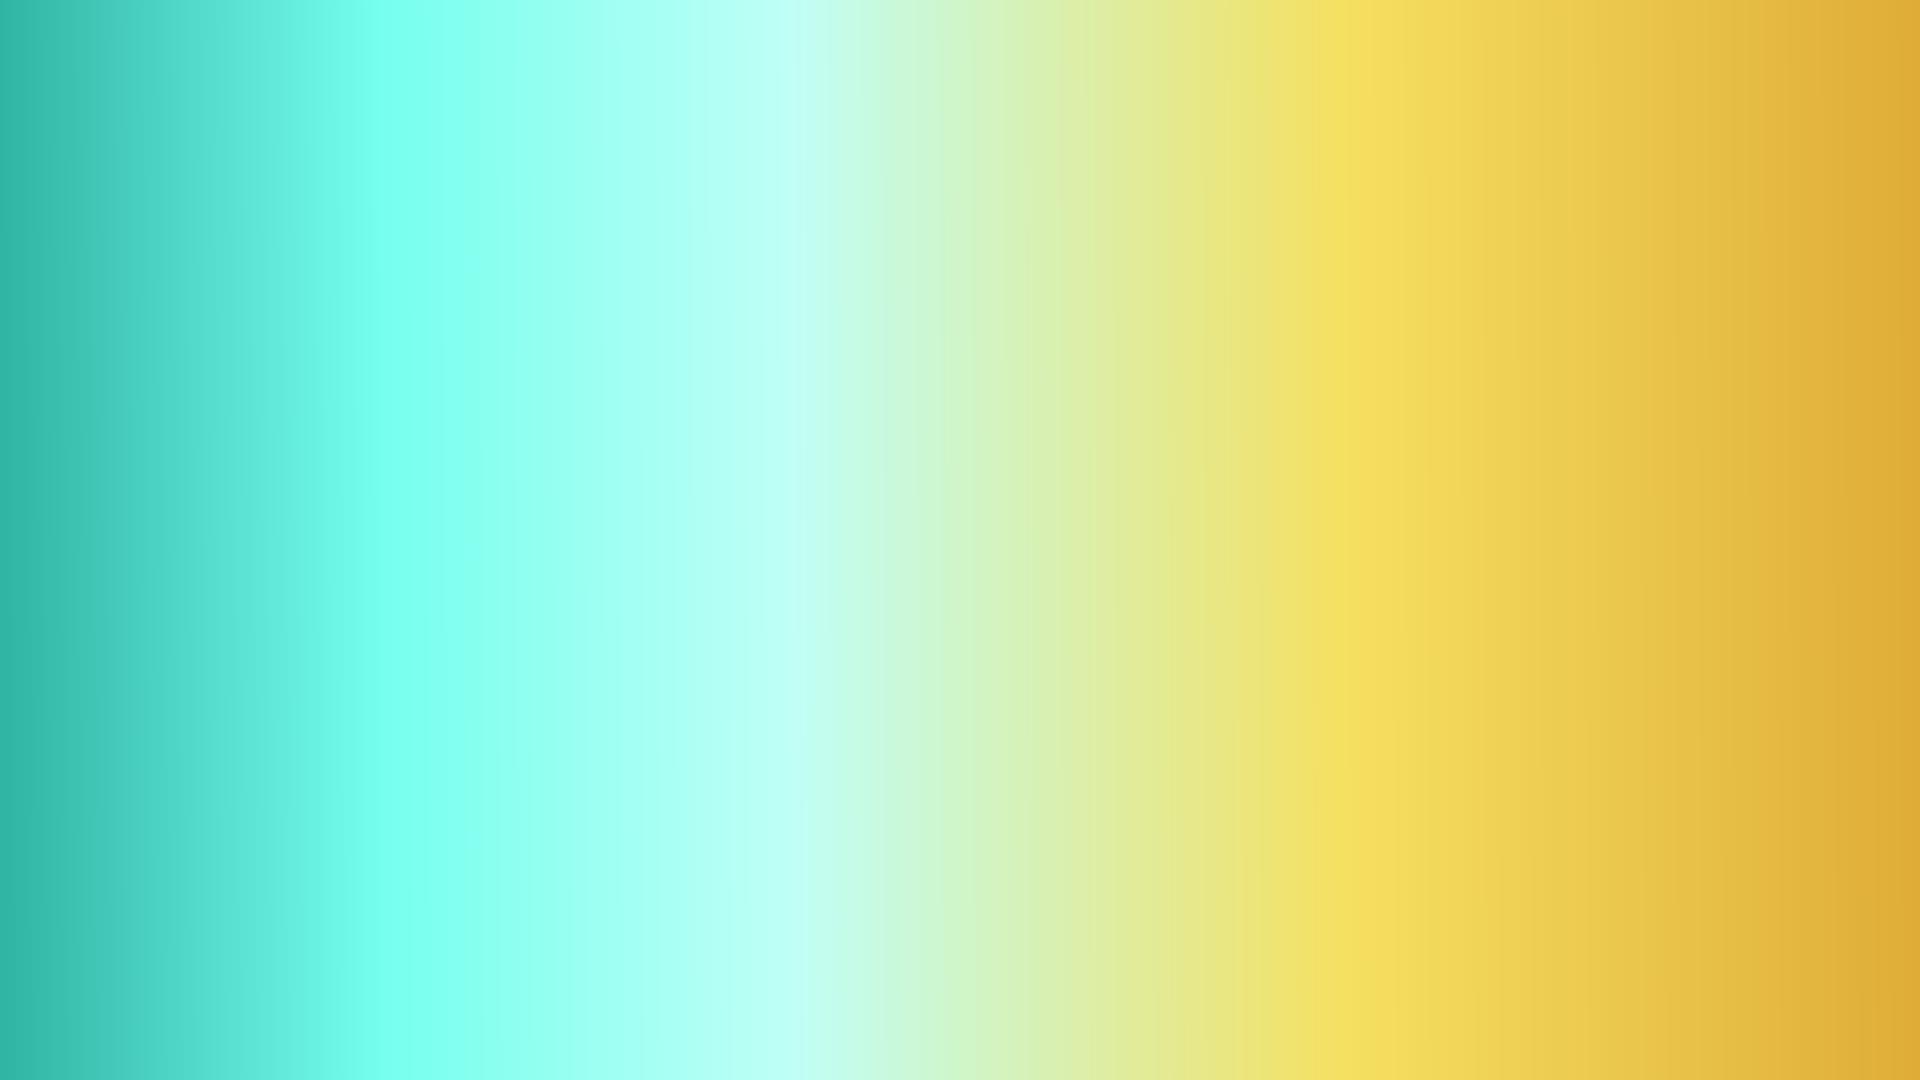 Cmm Teal-yellow Gradient - Colorfulness - HD Wallpaper 